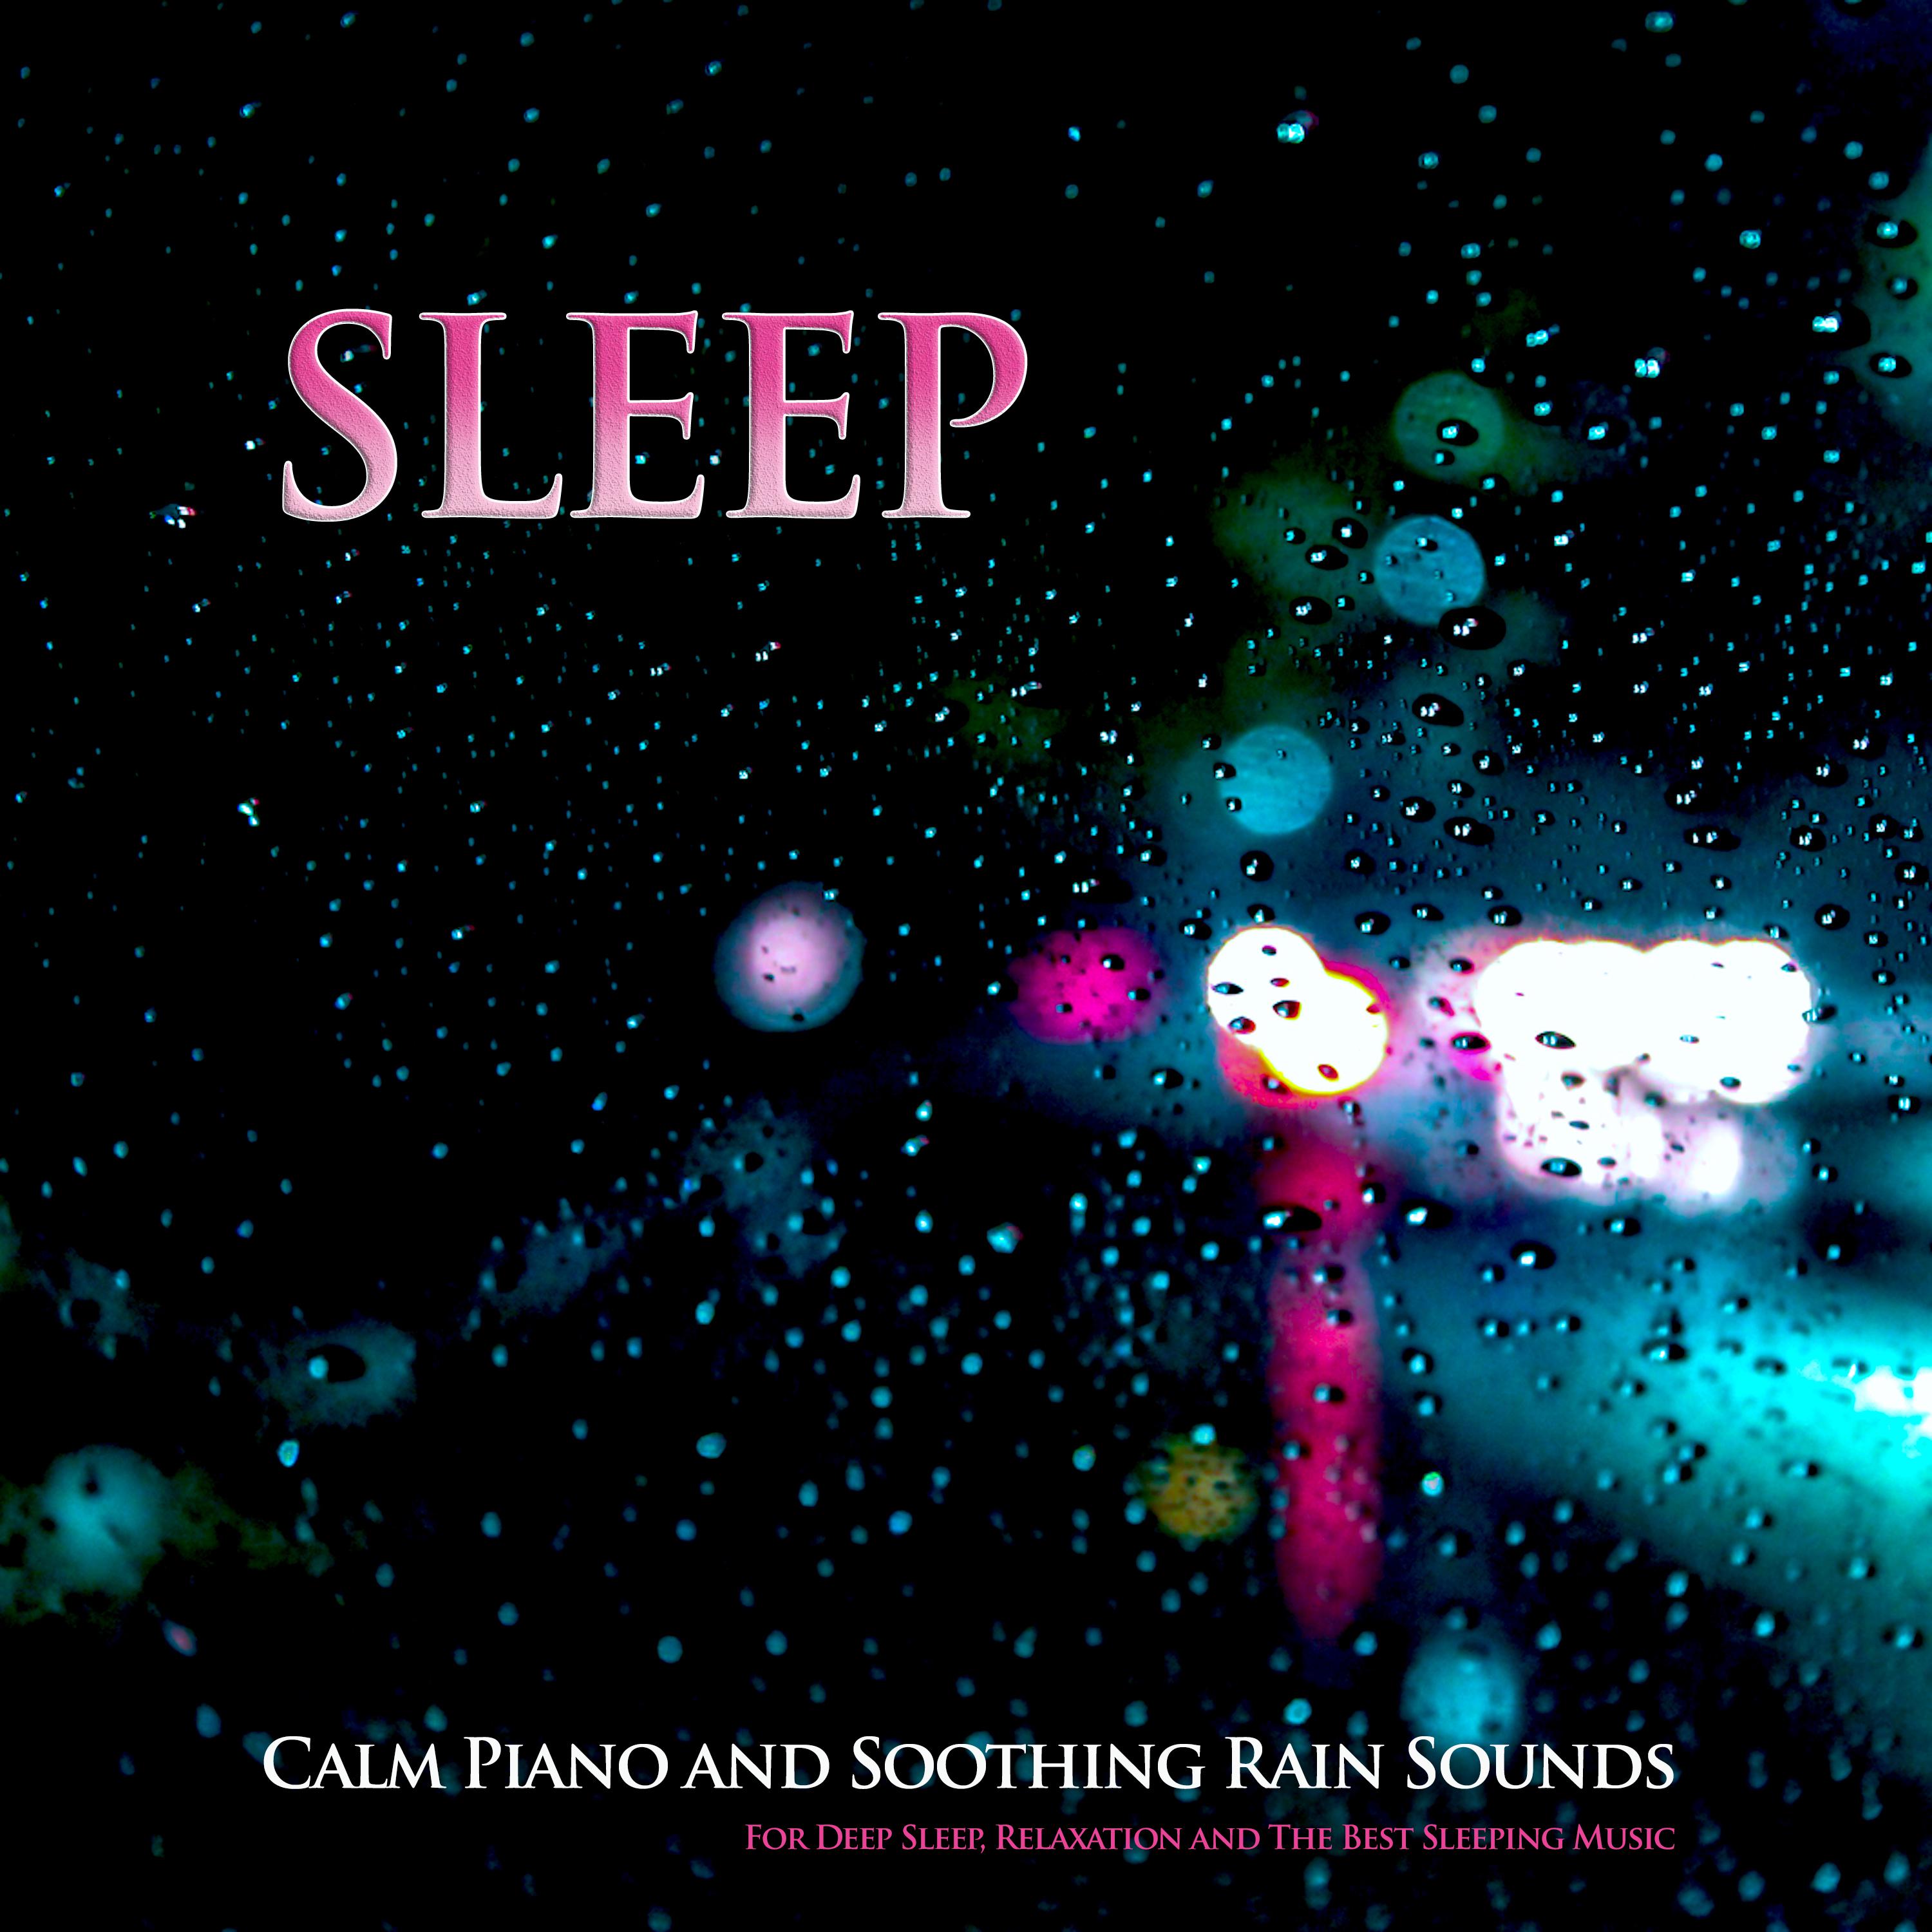 Sleep: Calm Piano and Soothing Rain Sounds For Deep Sleep, Relaxation and The Best Sleeping Music